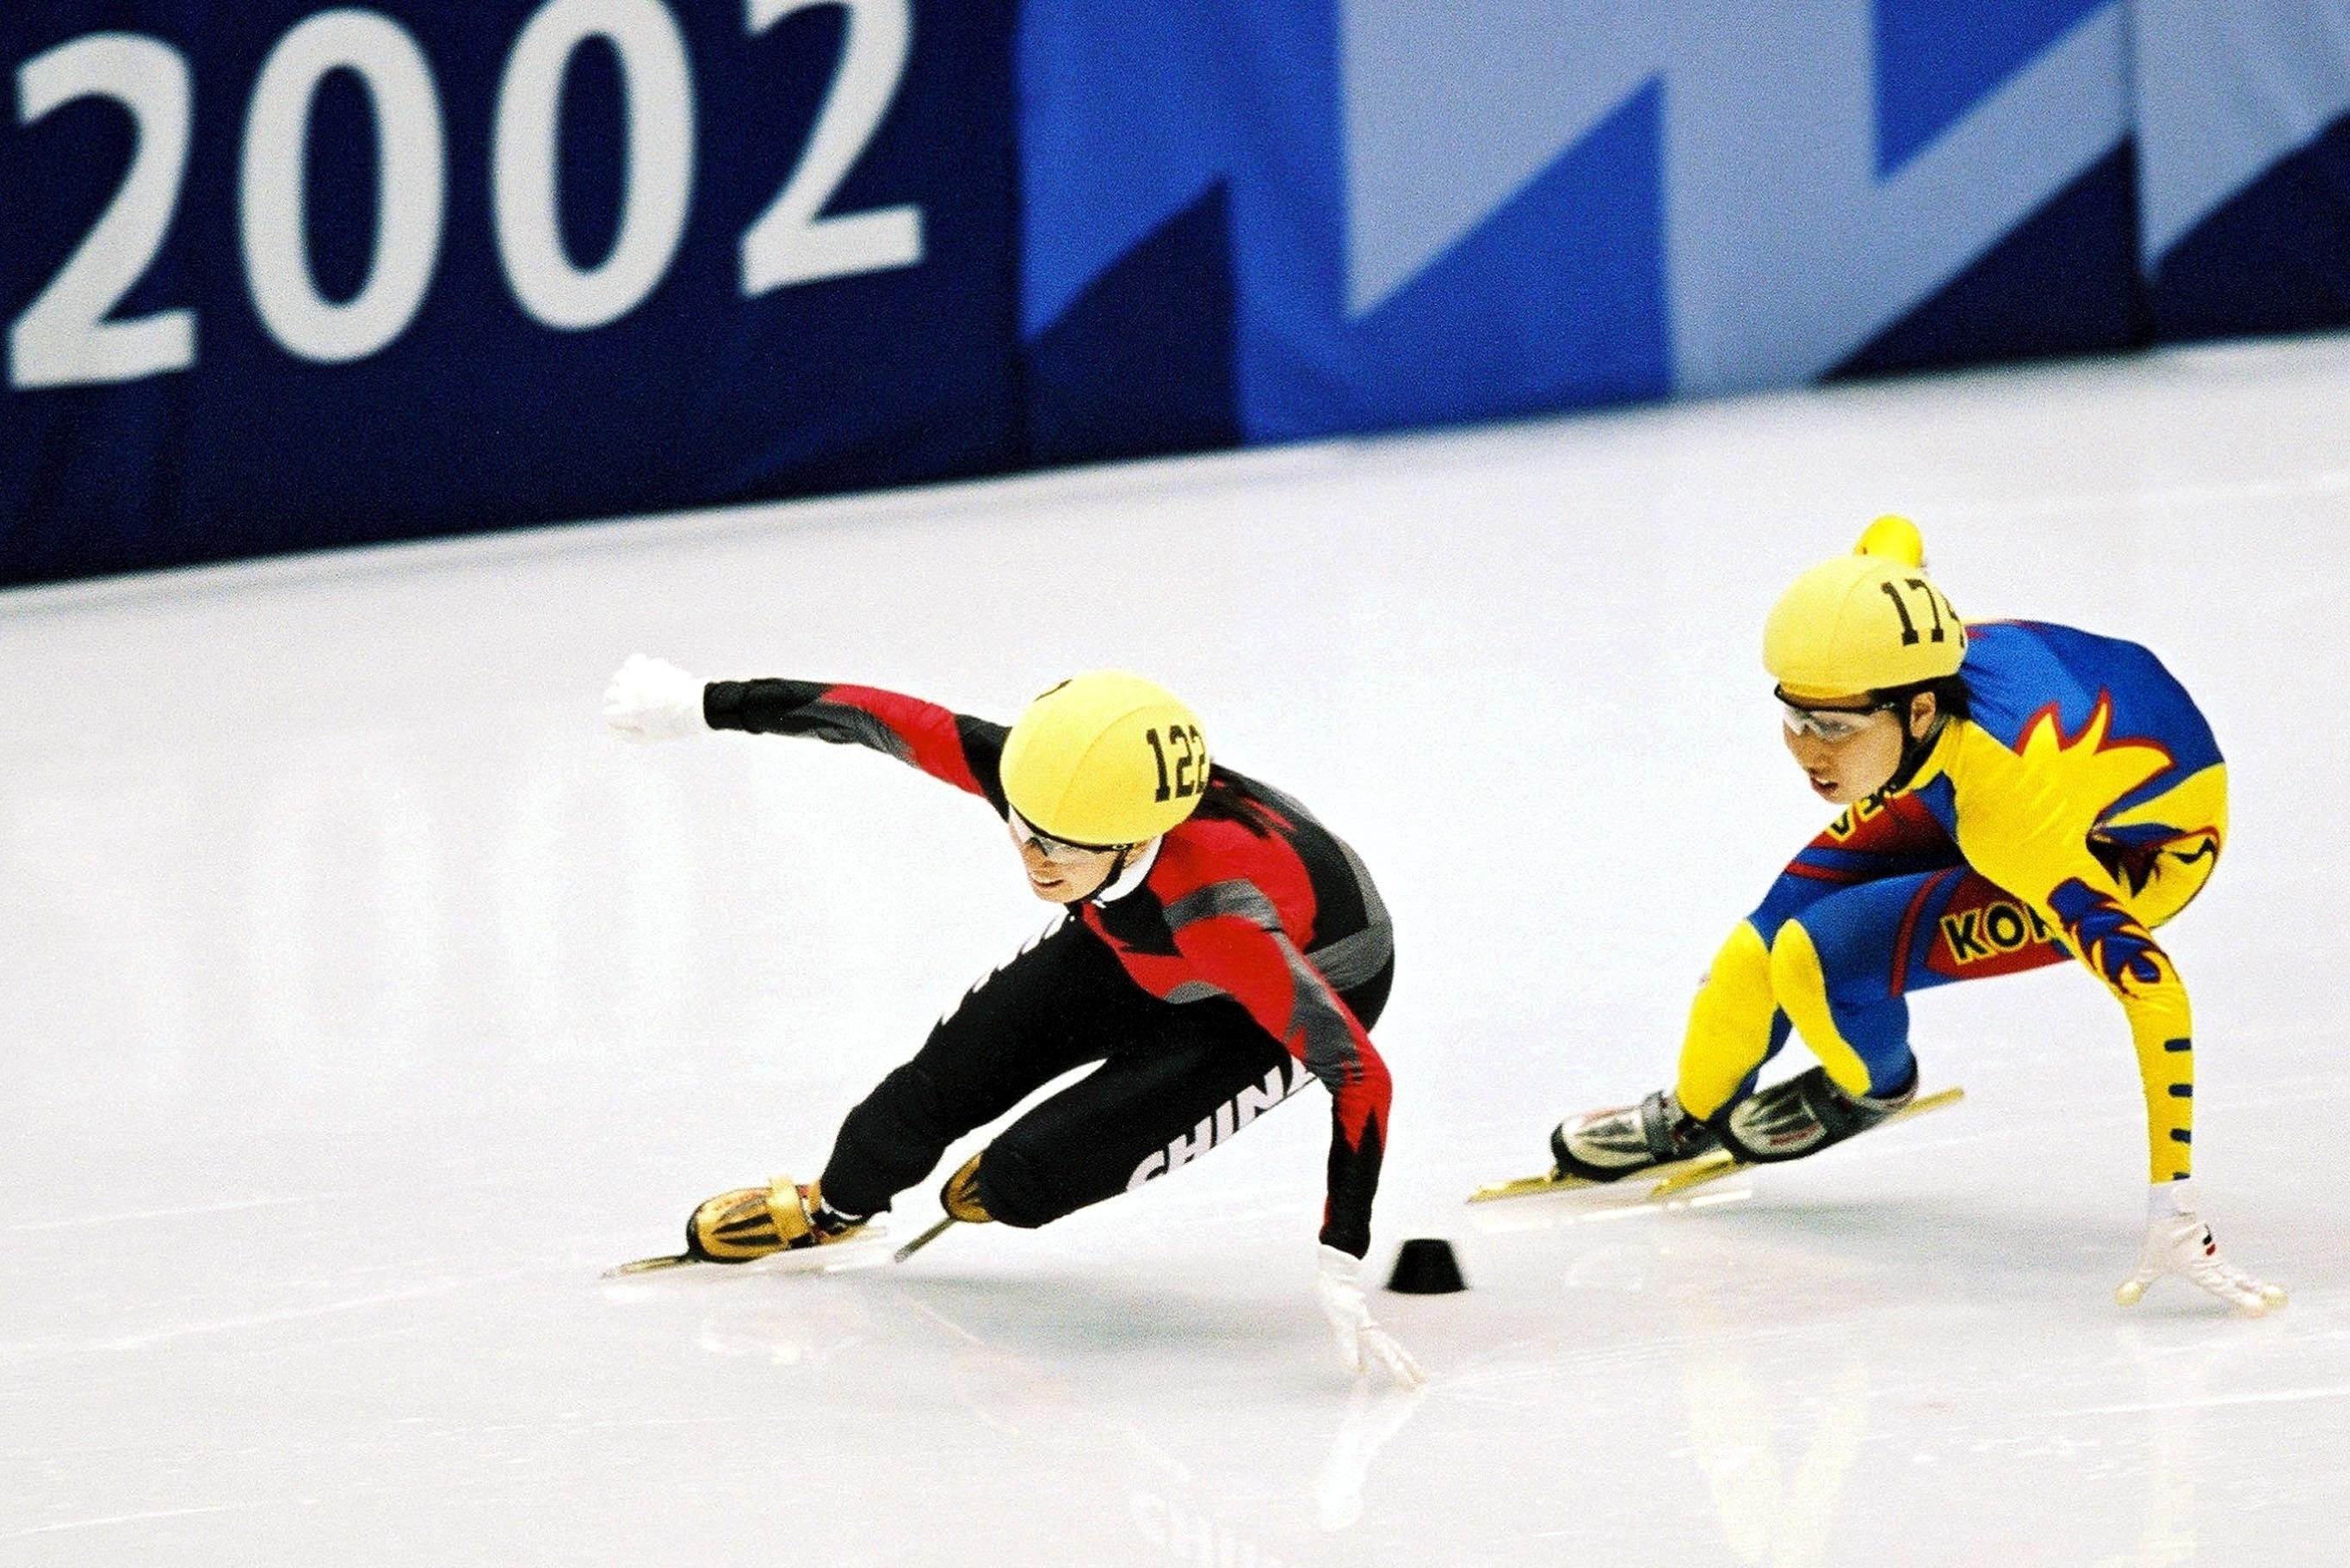 Yang Yang (L) leading Korea's Ko Hyun-Gi during the women's 1,000m short track speed skating finals at the 2002 Olympic Winter Games in Salt Lake City on February 23, 2002.